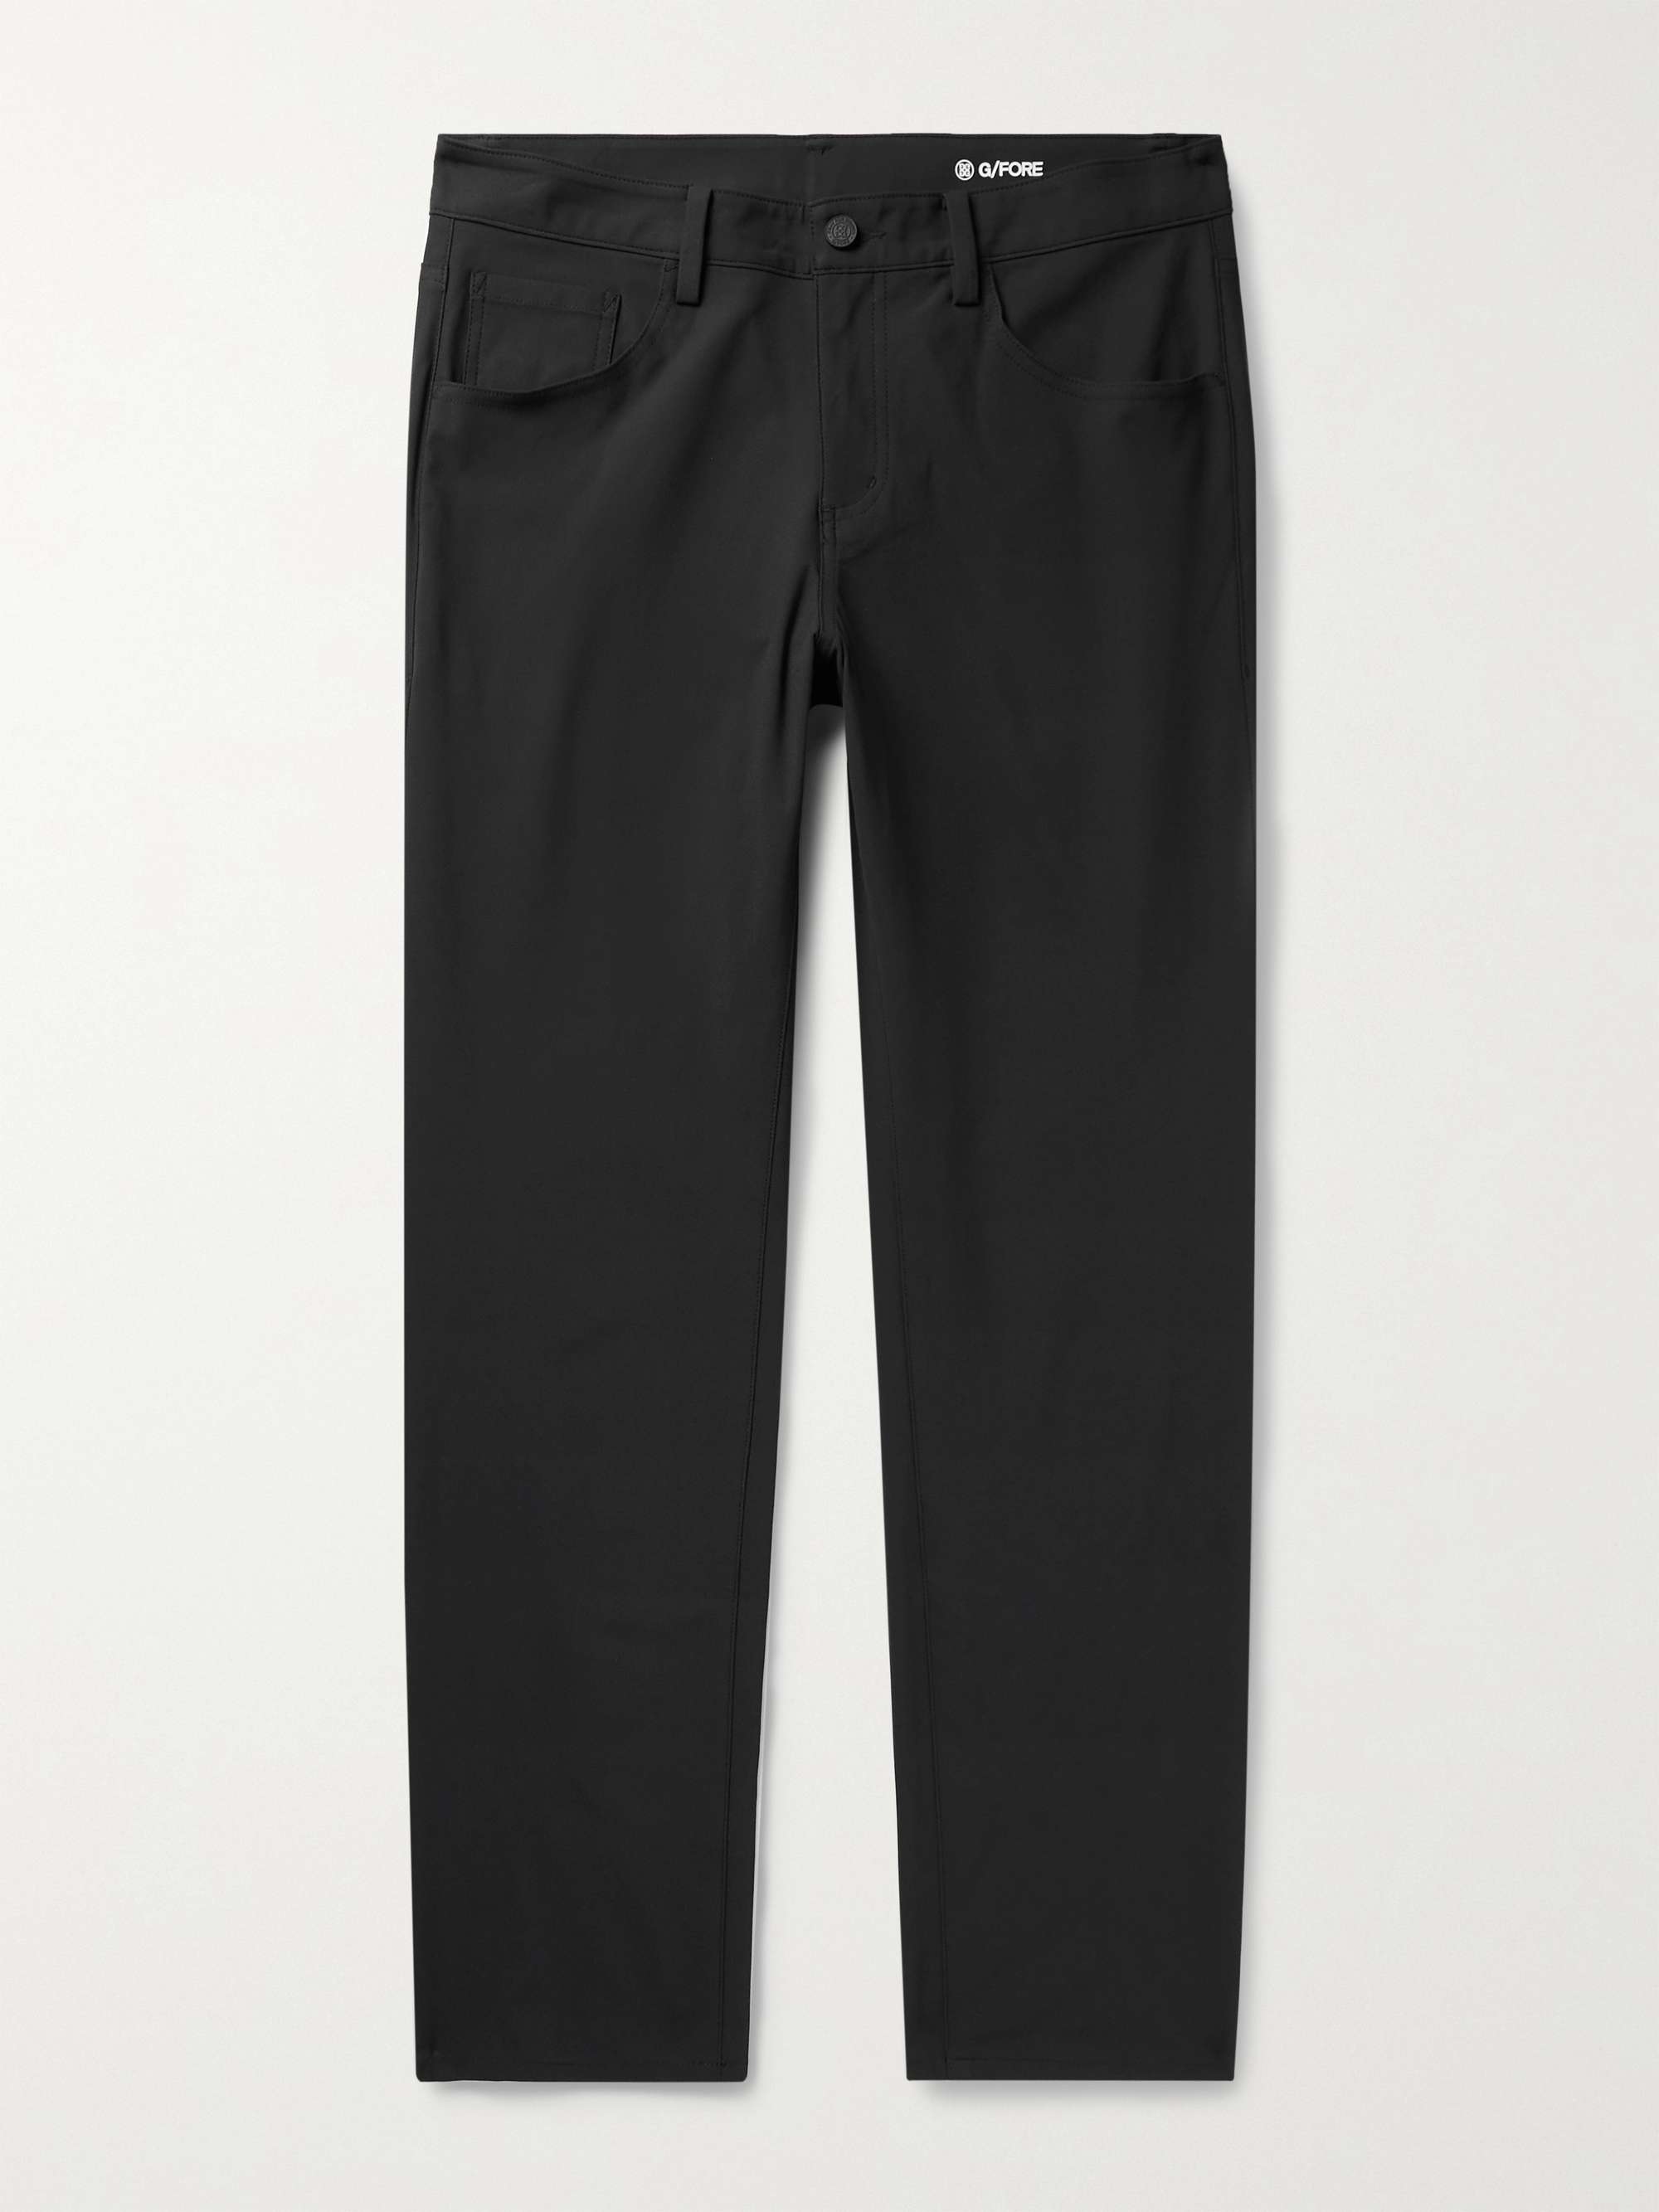 G/FORE Tour 5 Straight-Leg Twill Golf Trousers